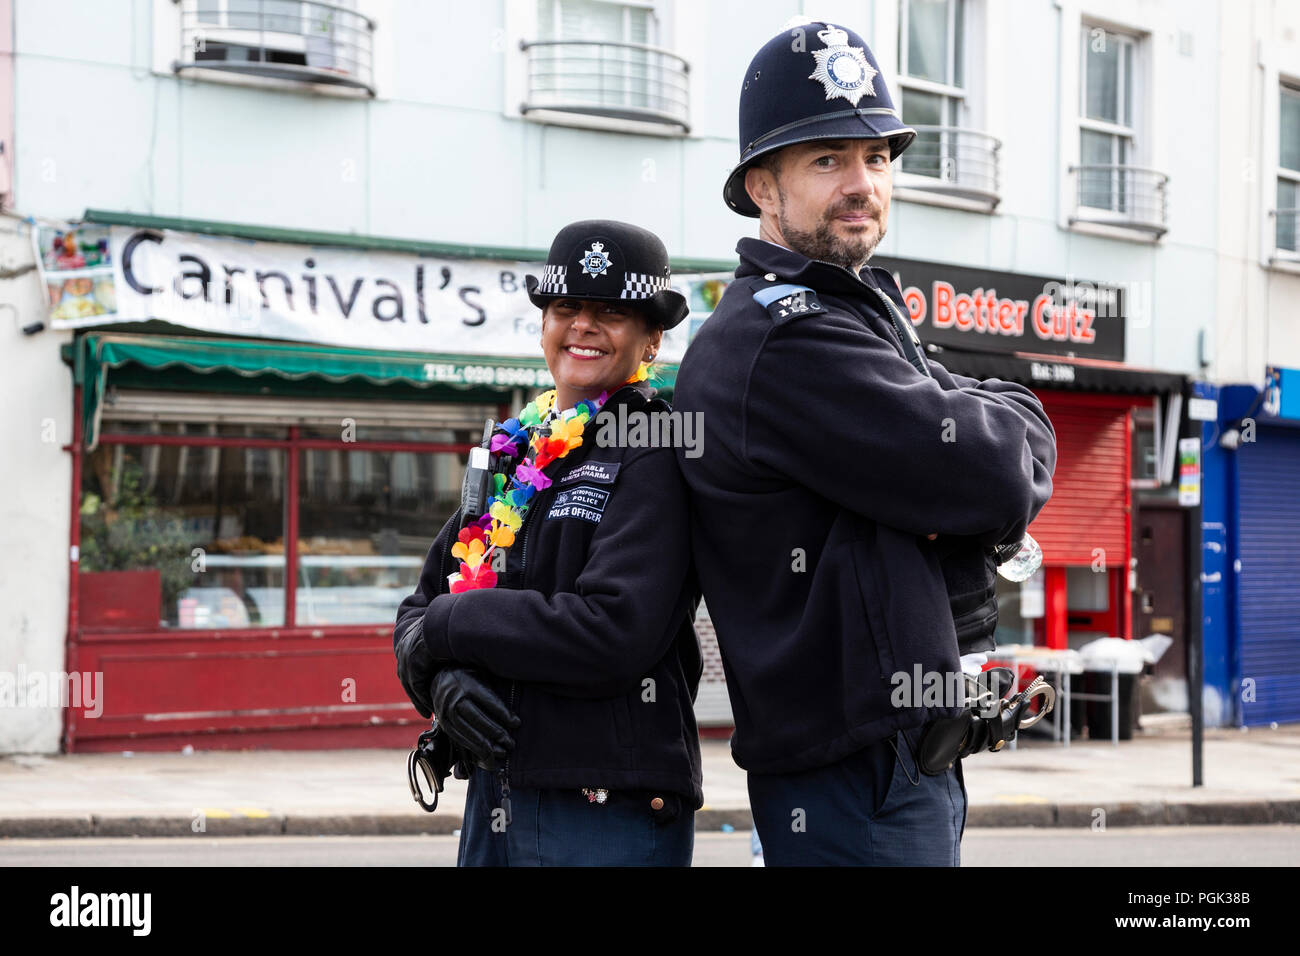 London, United Kingdom. 27 August 2018. Police officers at Notting Hill Carnival, Europe's largest street party.  Photo: Bettina Strenske/Alamy Live News Stock Photo